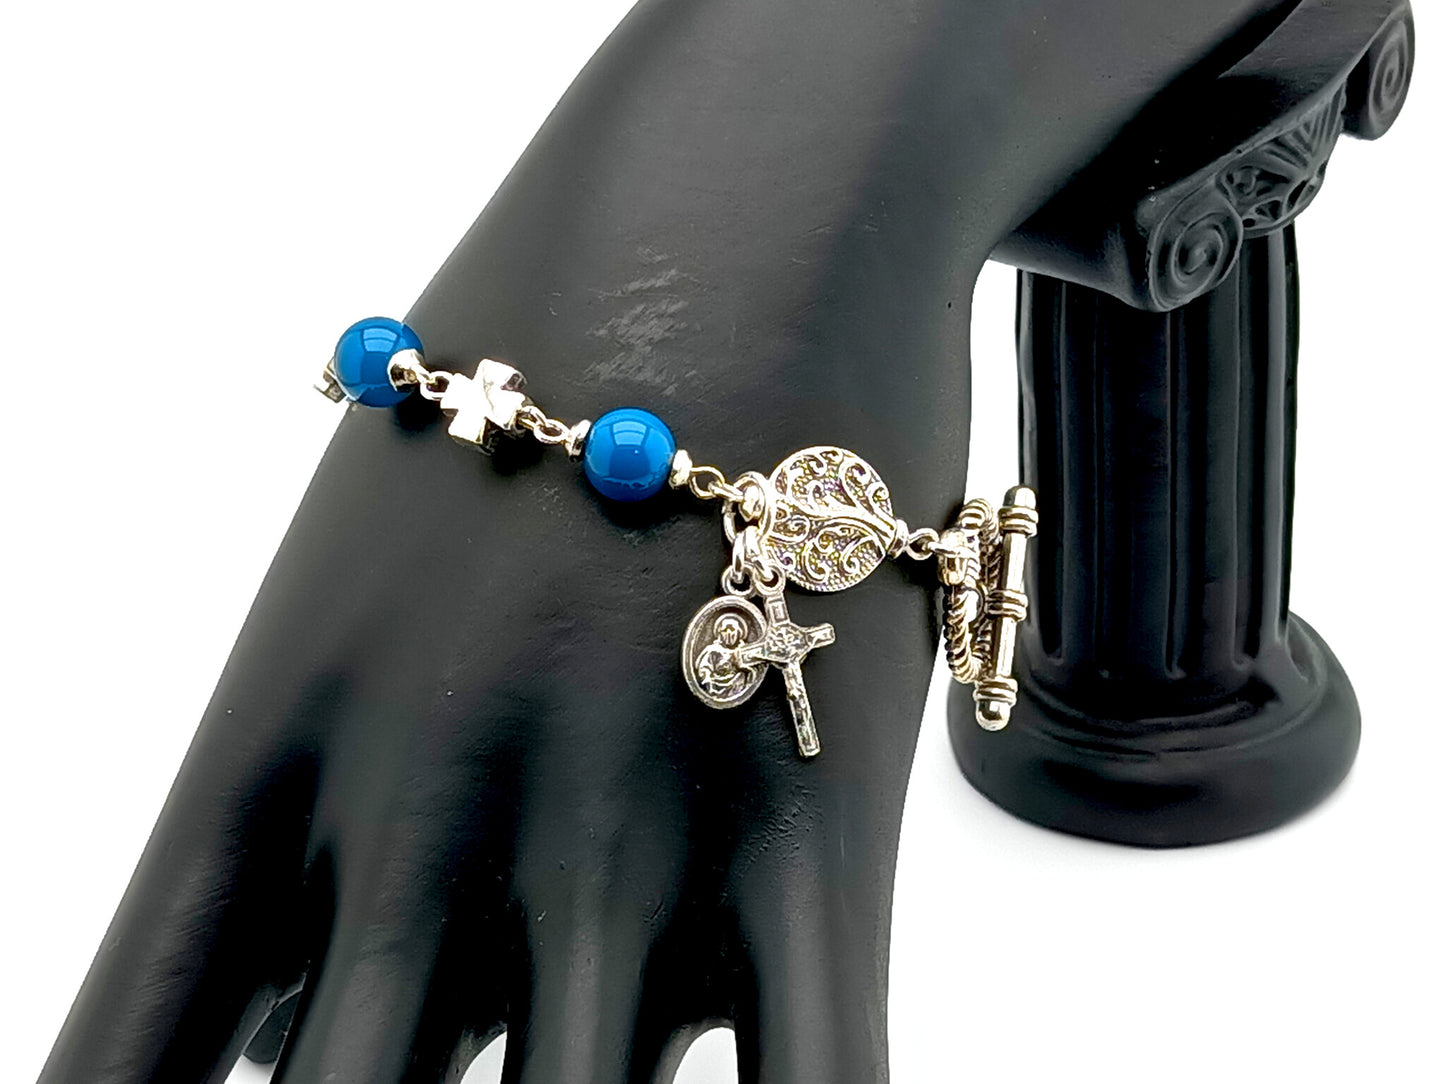 Our Lady of Mount Carmel unique rosary beads single decade rosary bracelet with blue agate gemstone and silver cross beads, Saint Benedict crucifix and toggle clasp.